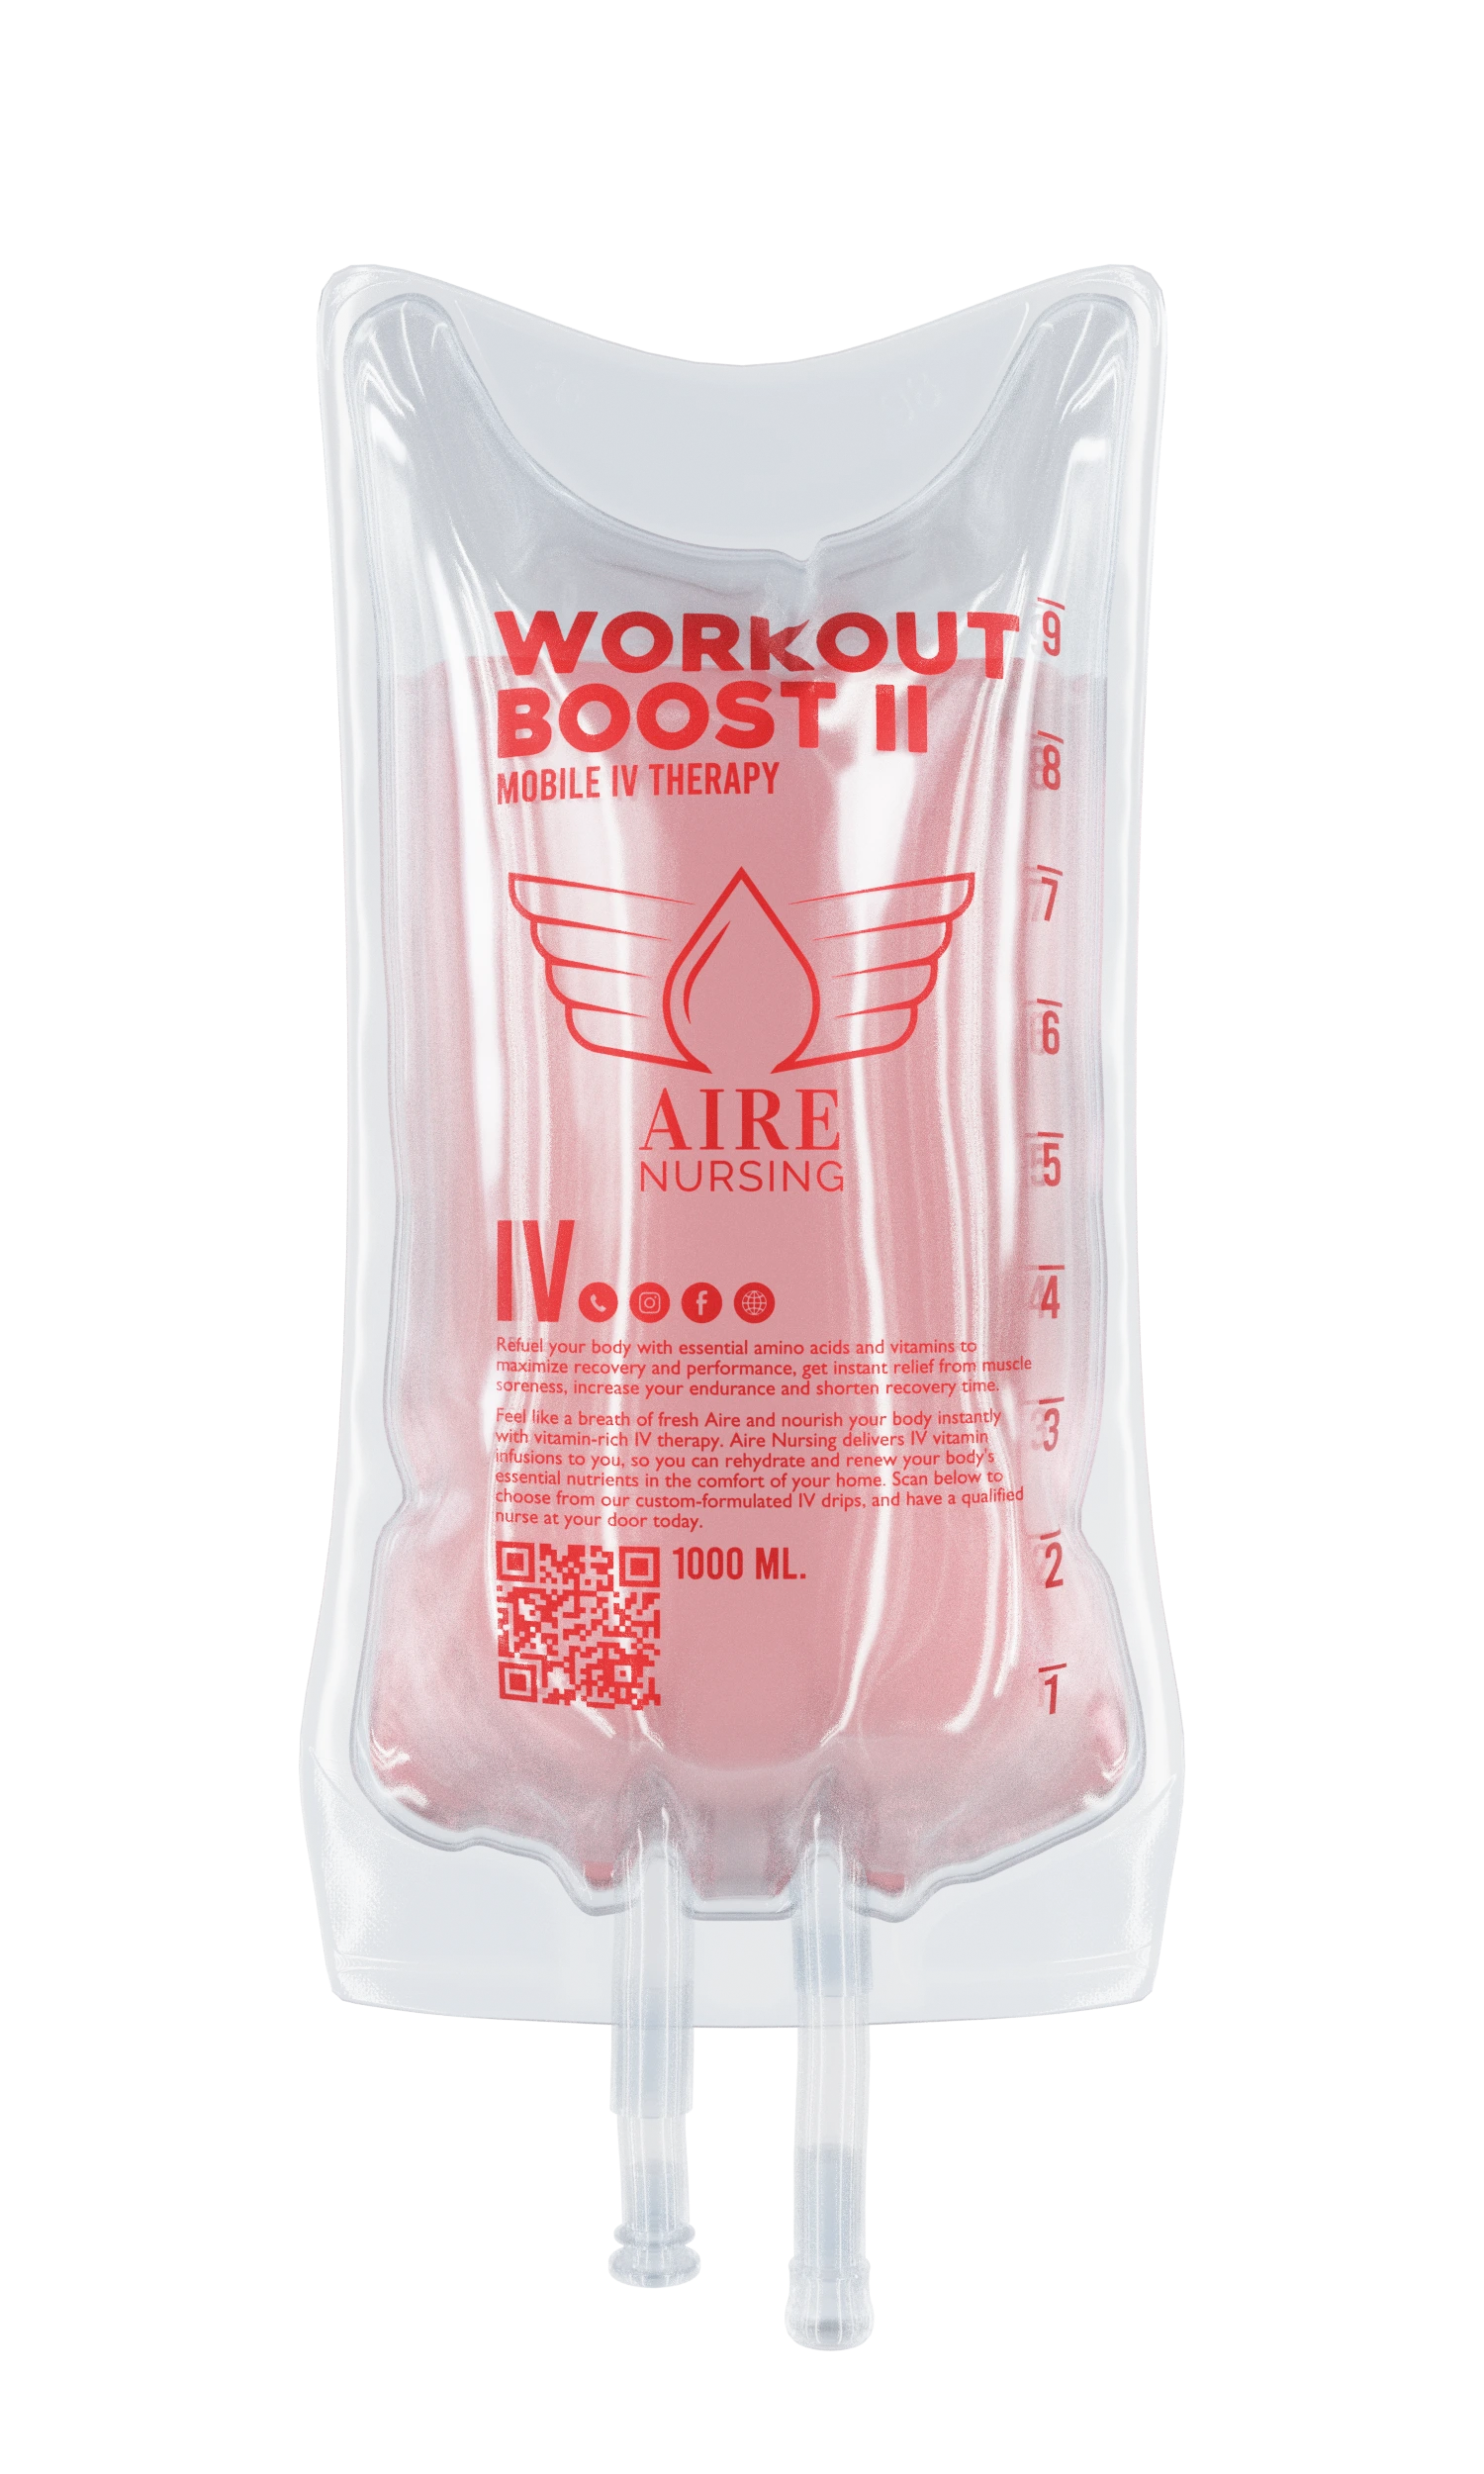 Workout Boost II